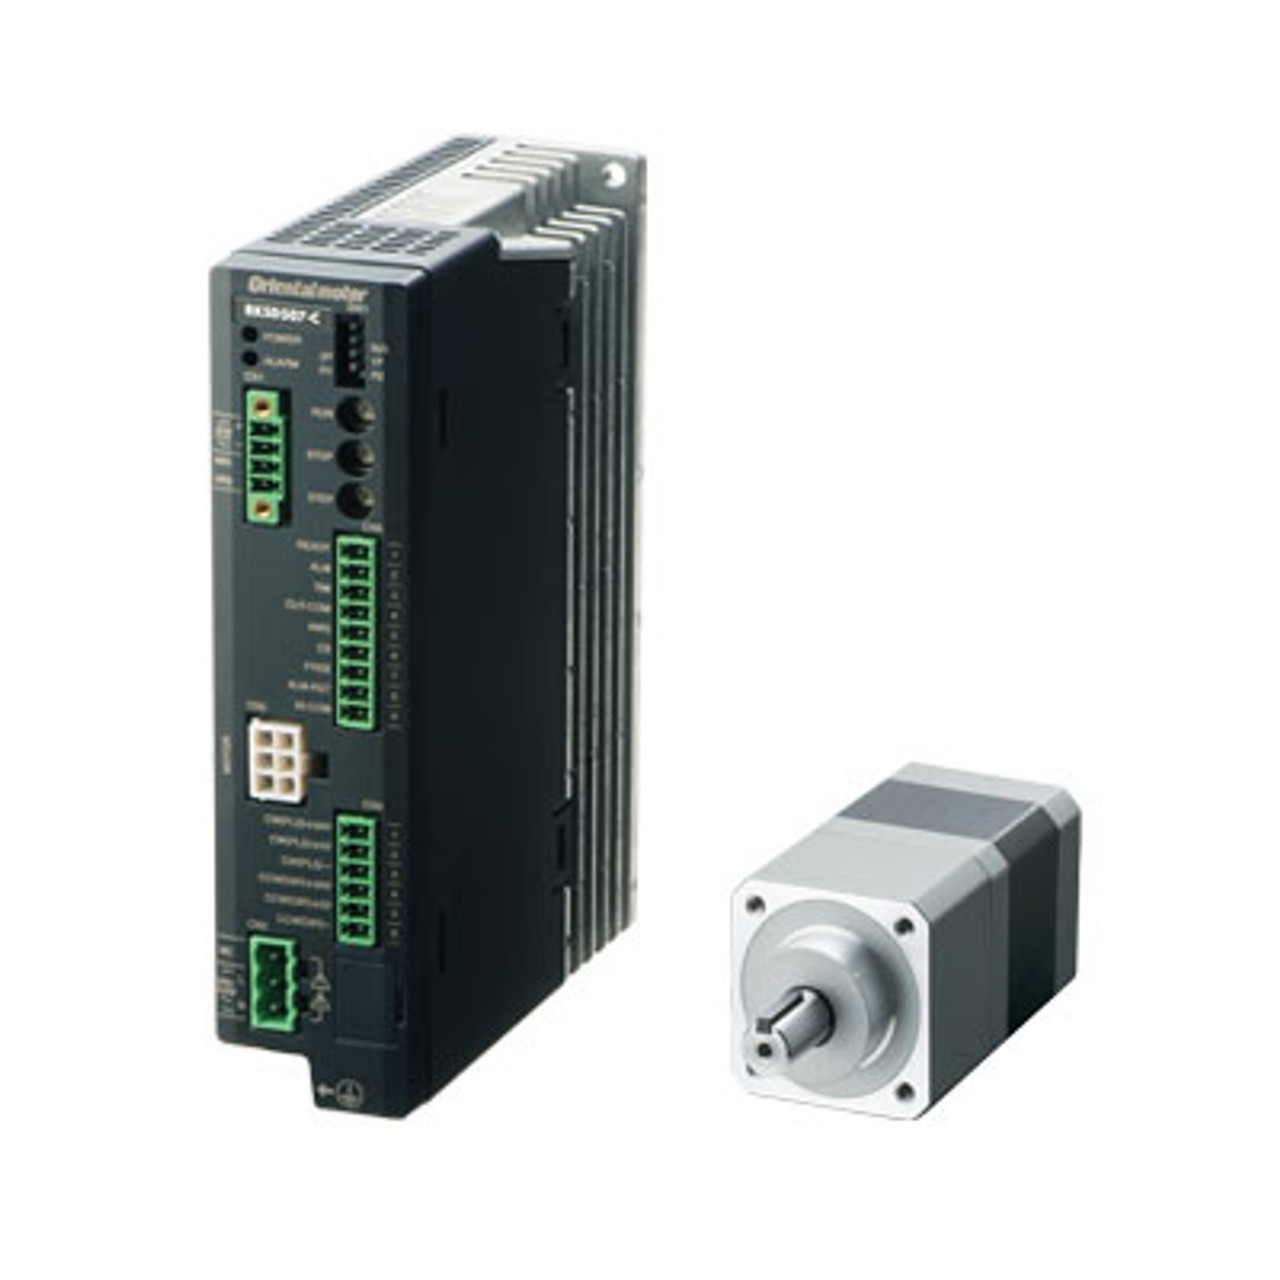 RKS543BC-PS25 - Product Image